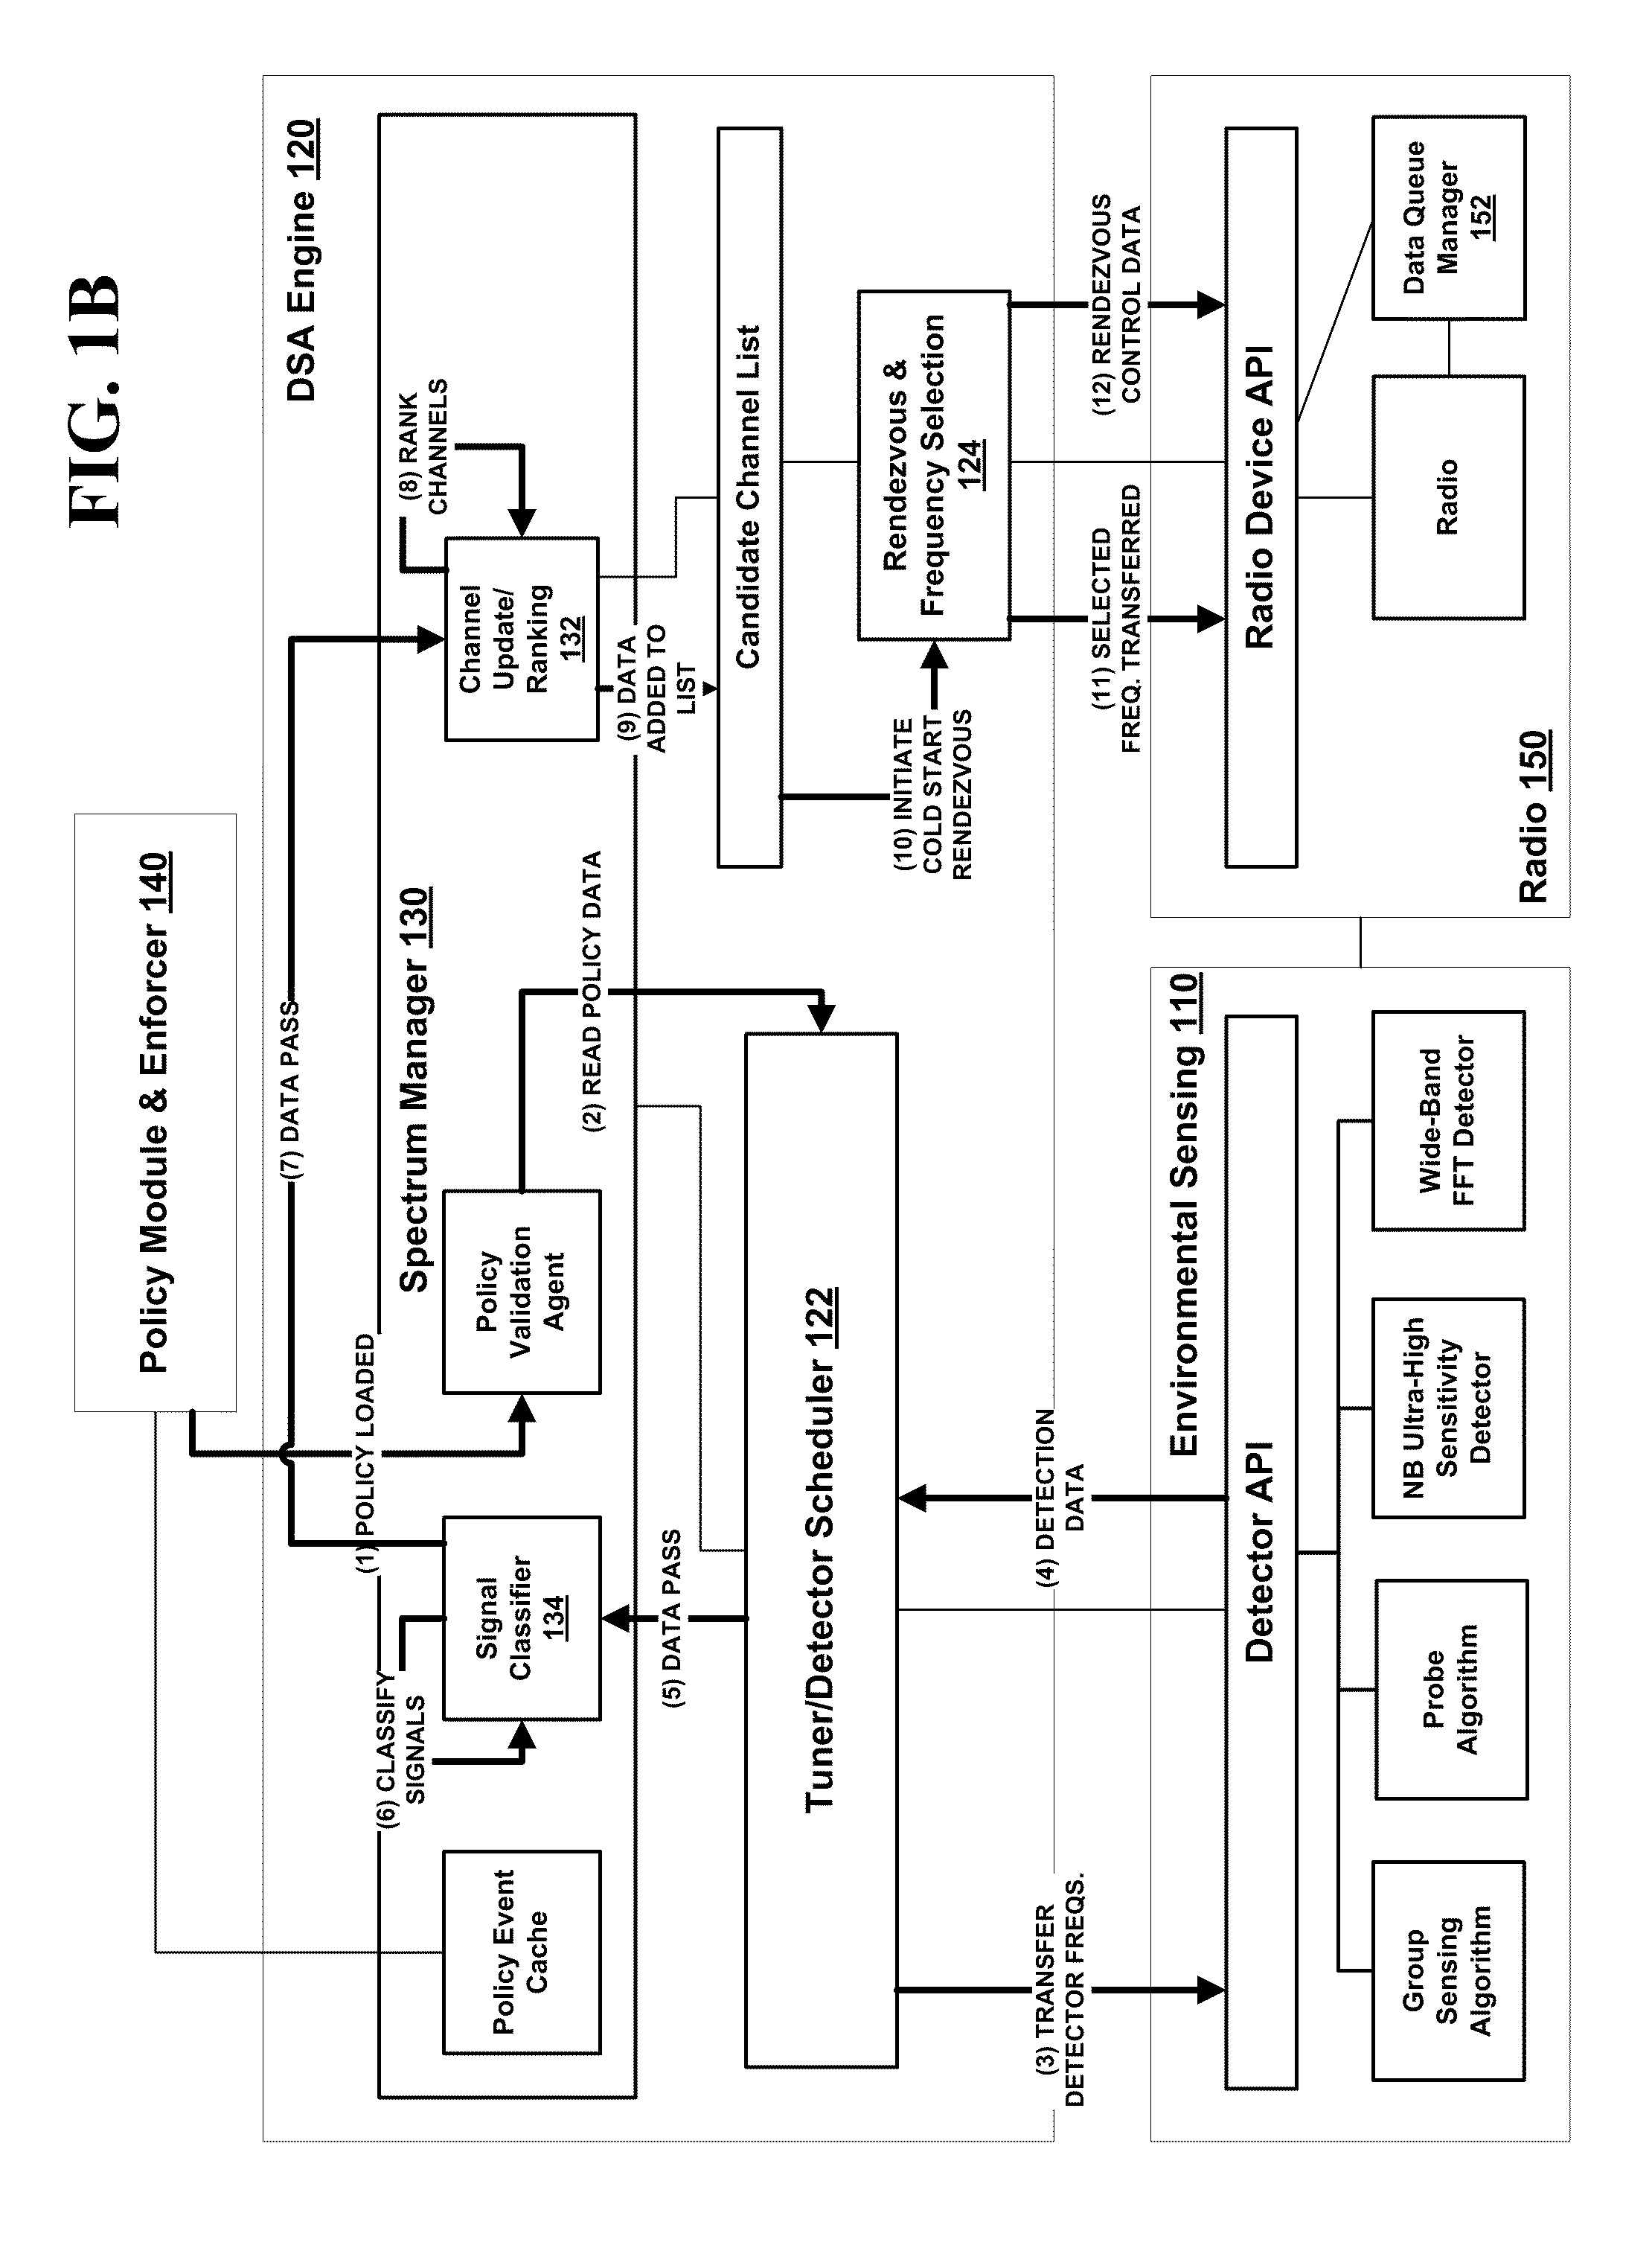 Method and system for dynamic spectrum access using detection periods